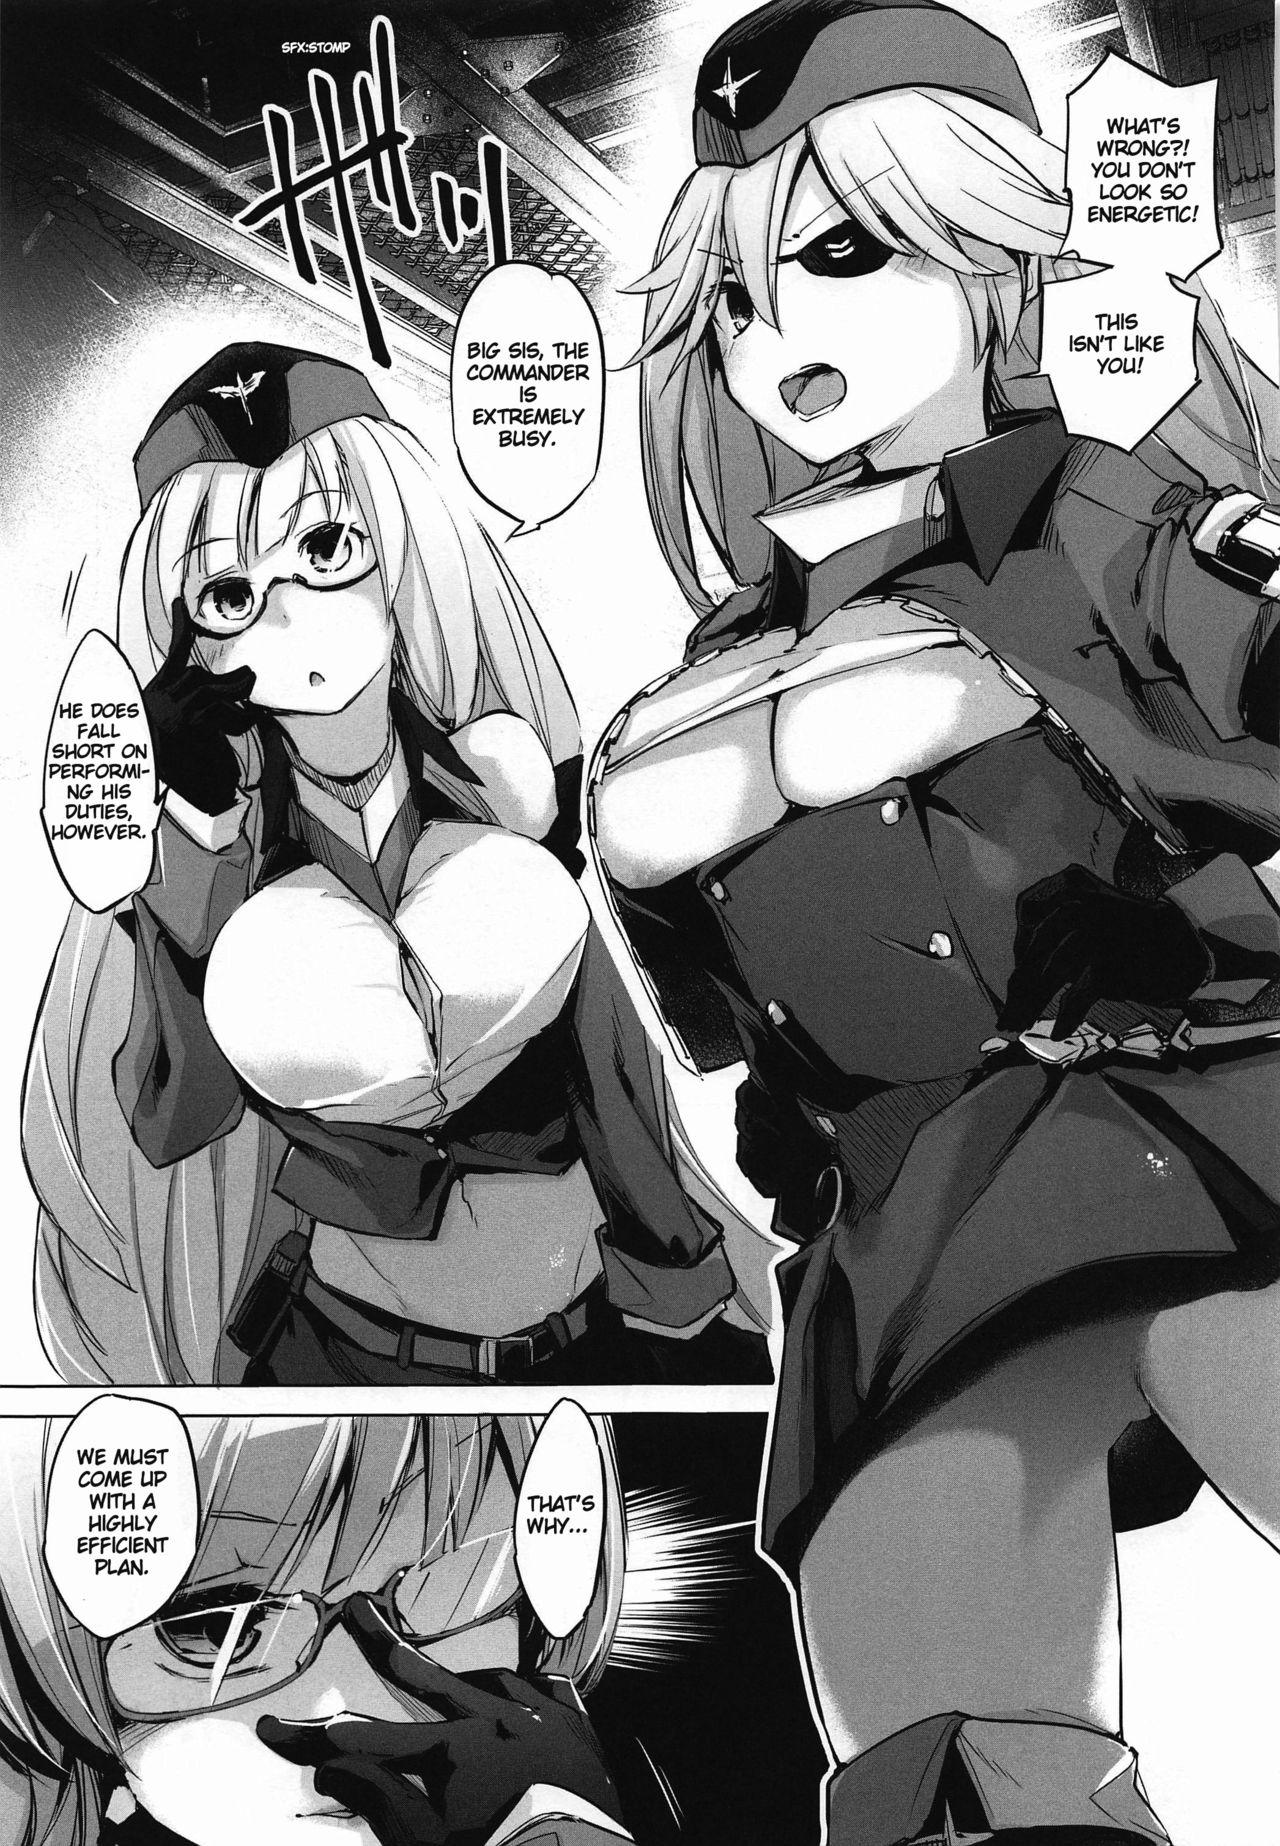 Stepbrother Insufficient main force to shoot ! Iron-Blood Battleship and Battle Cruiser Summary Book - Azur lane Indian - Page 4